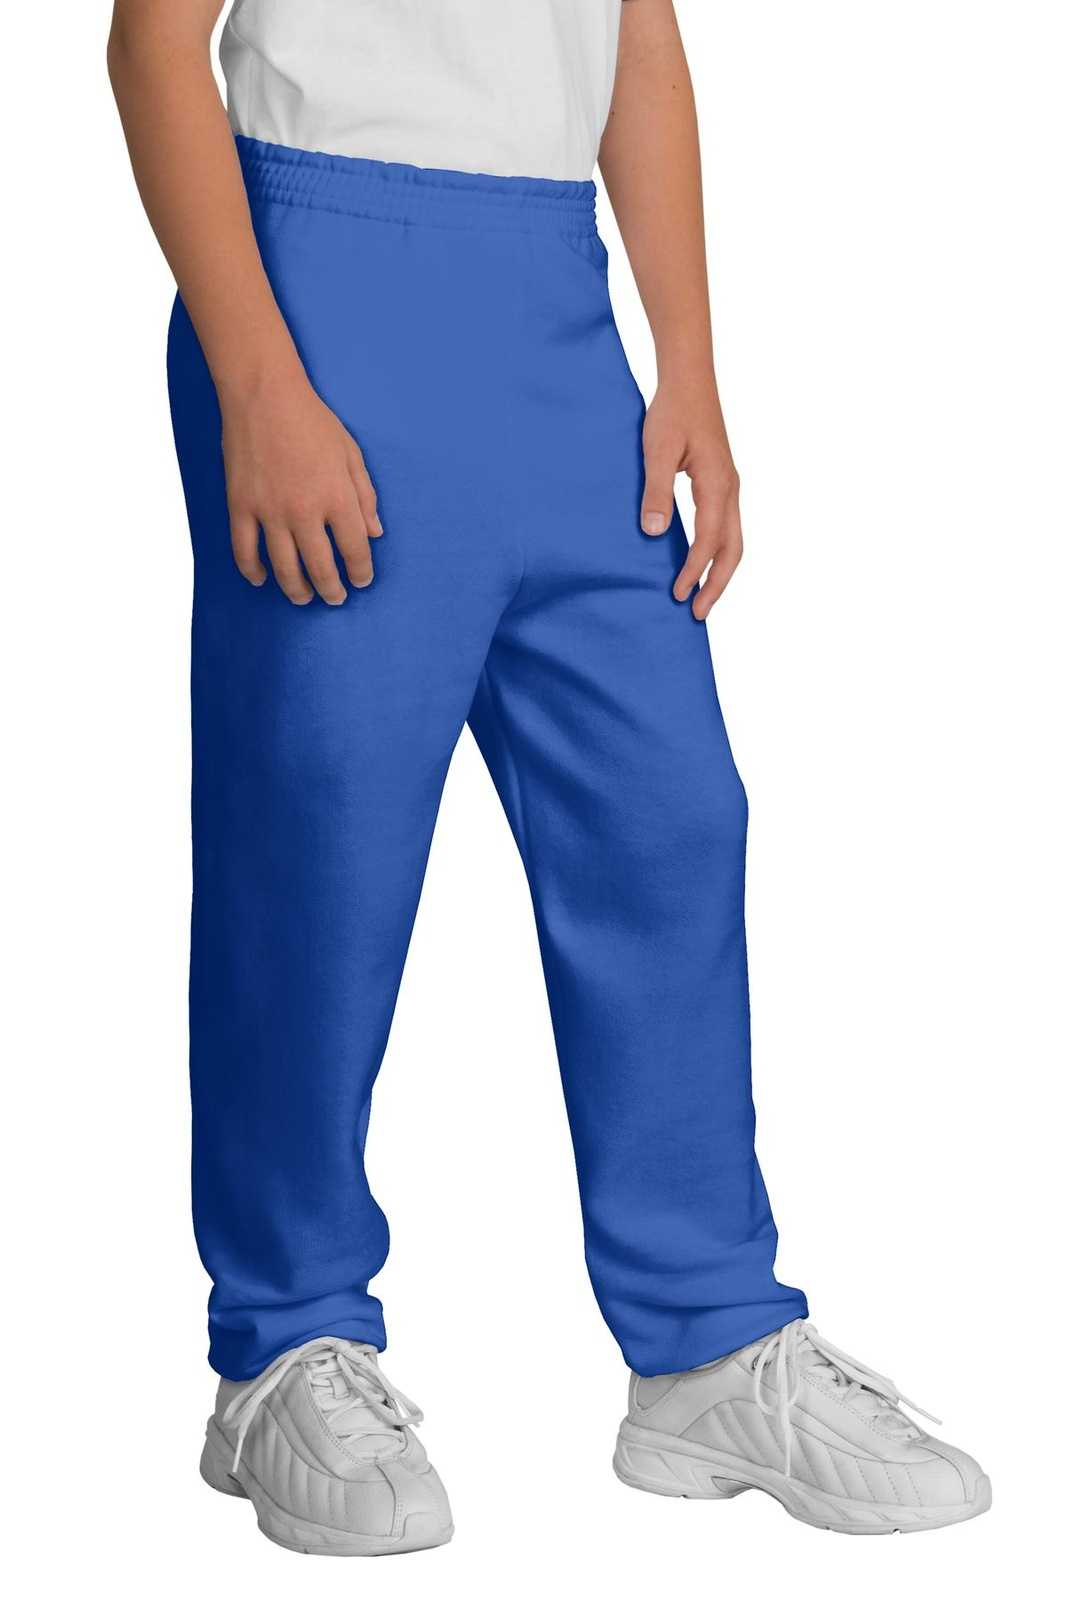 Port & Company PC90YP Youth Core Fleece Sweatpant - Royal - HIT a Double - 1